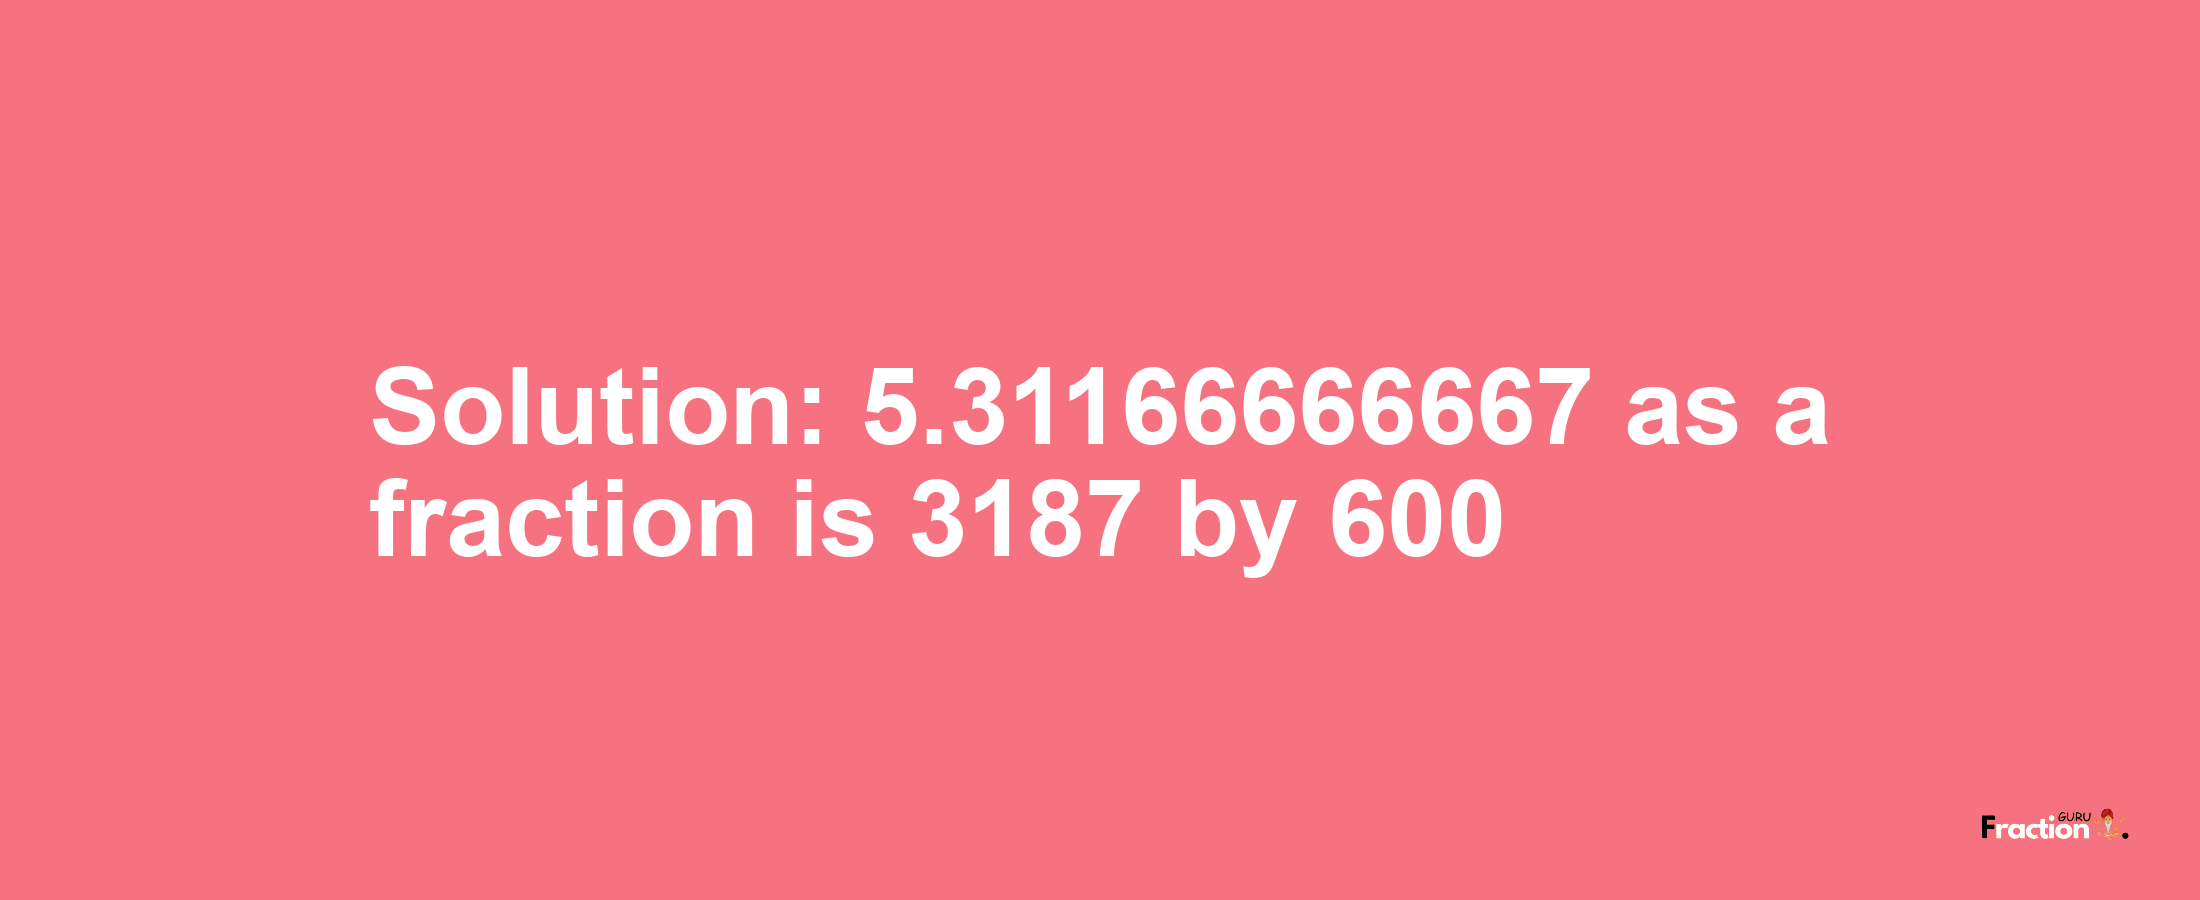 Solution:5.31166666667 as a fraction is 3187/600